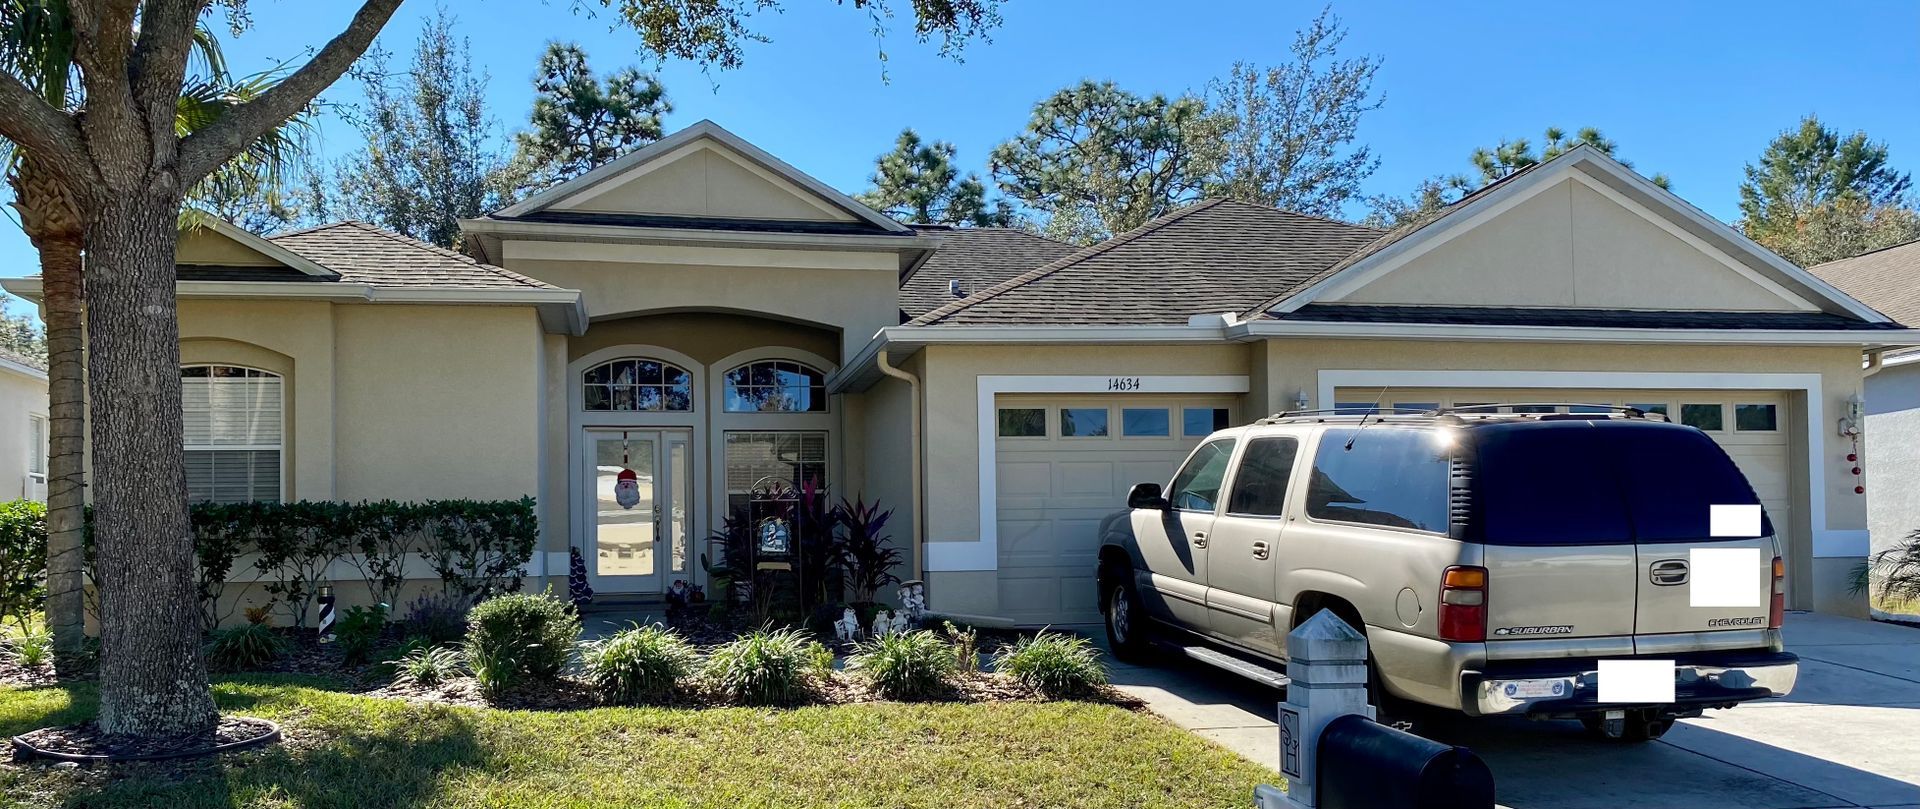 Before exterior painting | Spring Hill, FL